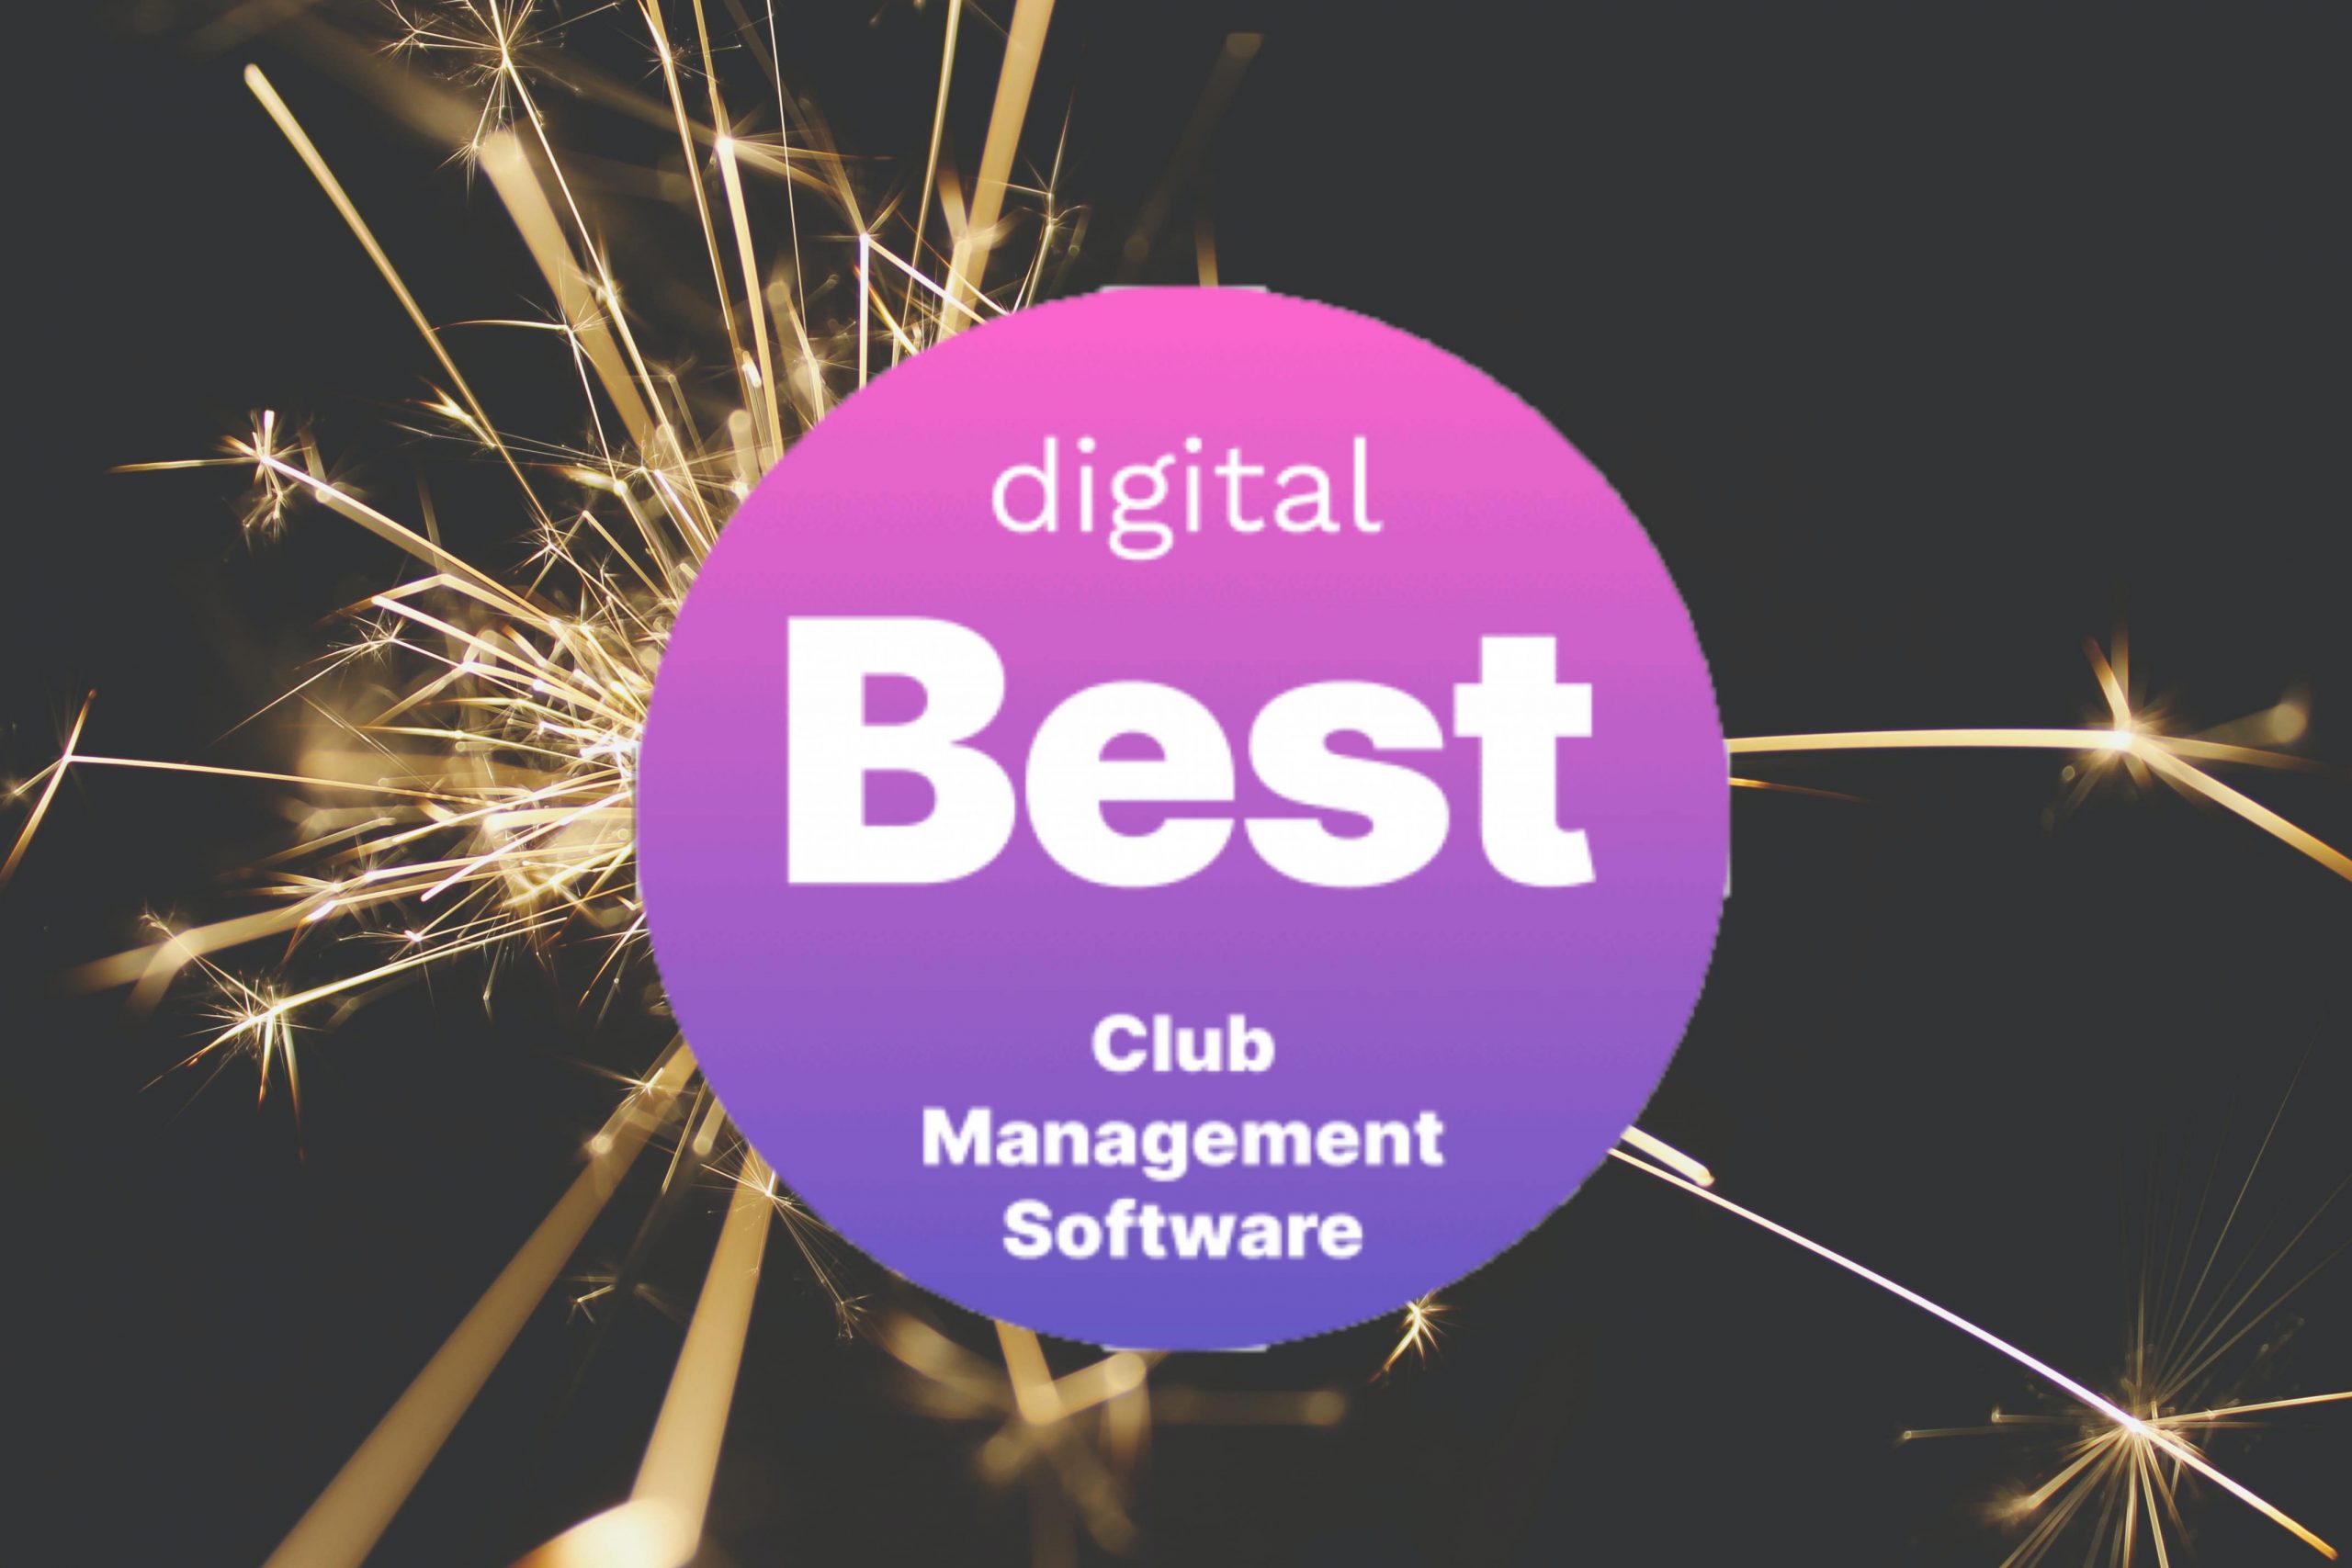 Raklet Listed in The Best Club Management Software of 2021 by Digital.com